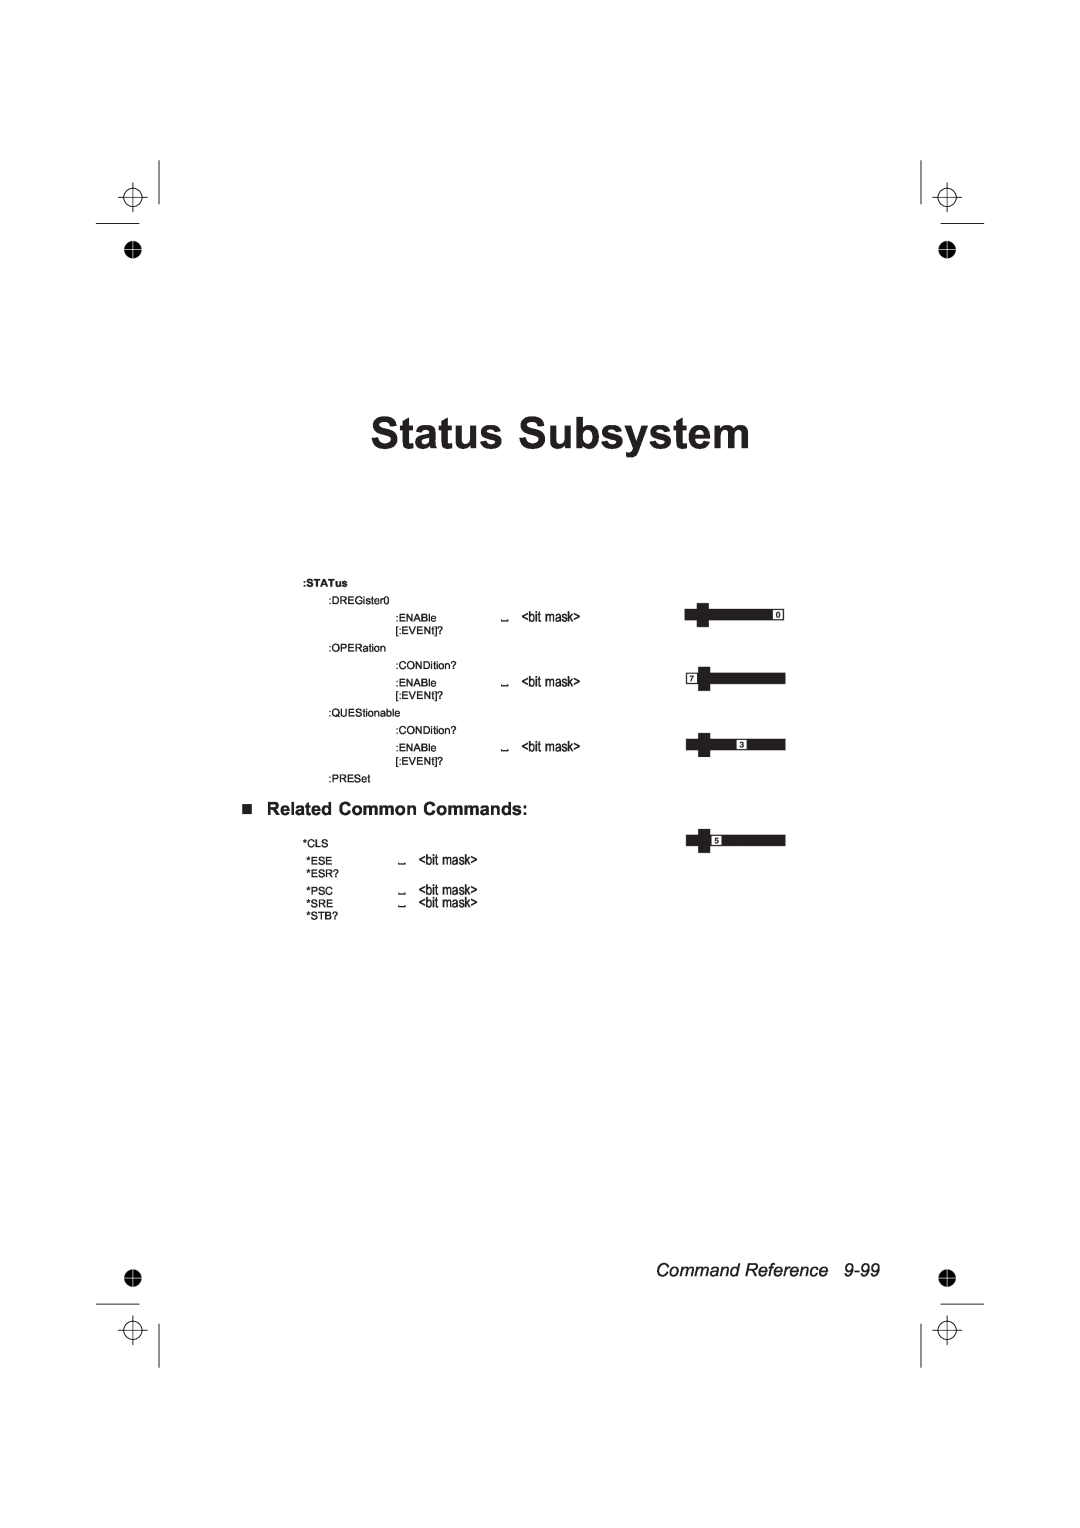 Fluke PM6681R, PM6685R manual Status Subsystem, Related Common Commands, Command Reference, STATus 